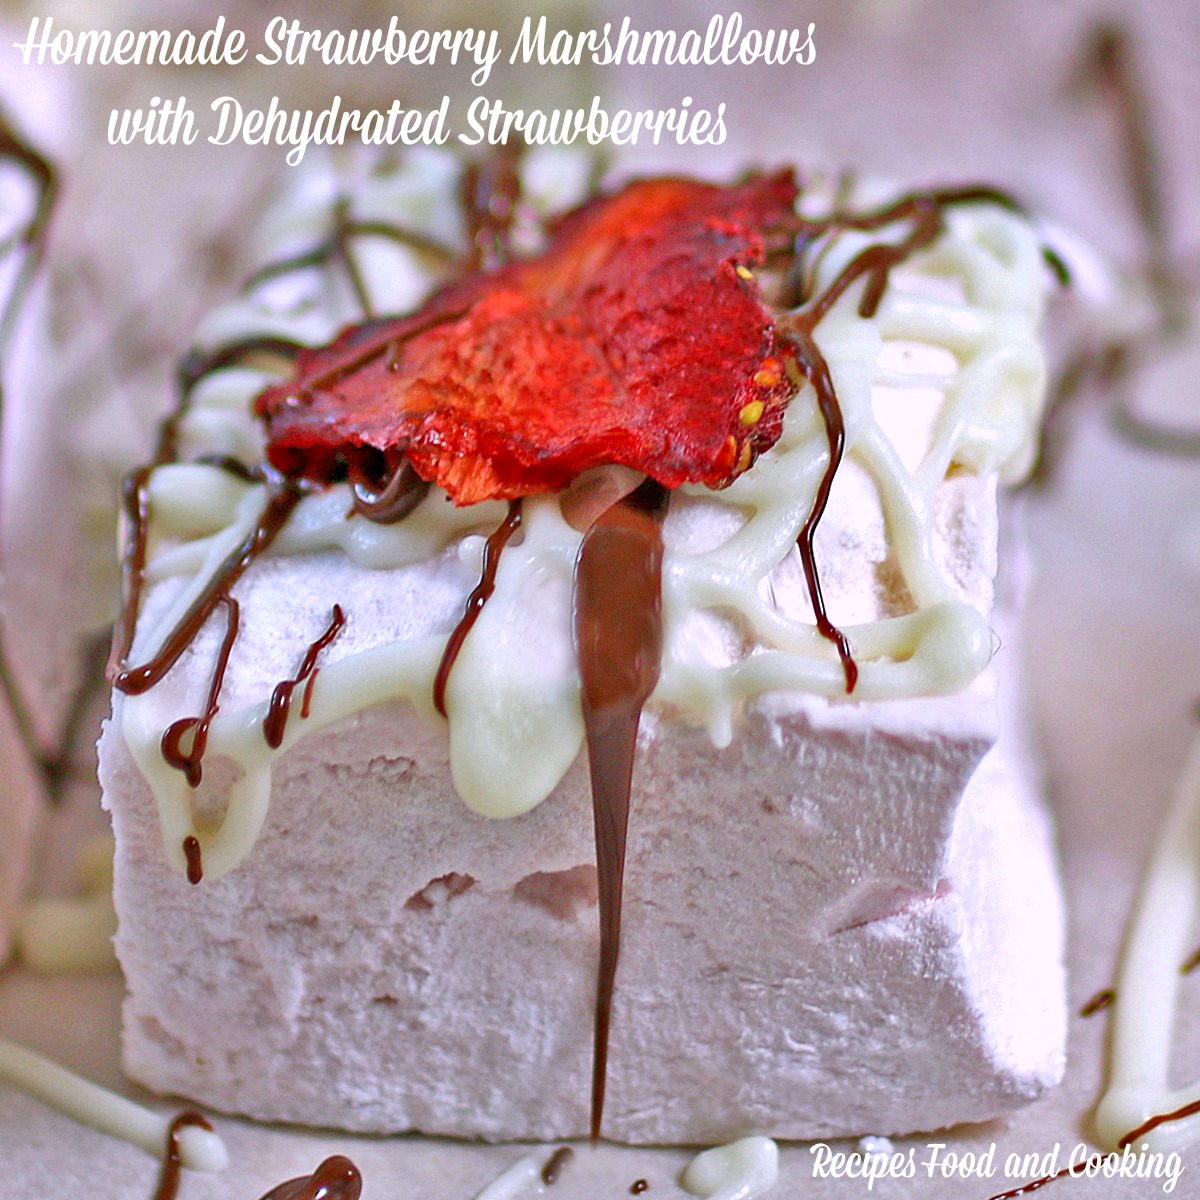 Homemade Strawberry Marshmallows with Dehydrated Strawberries